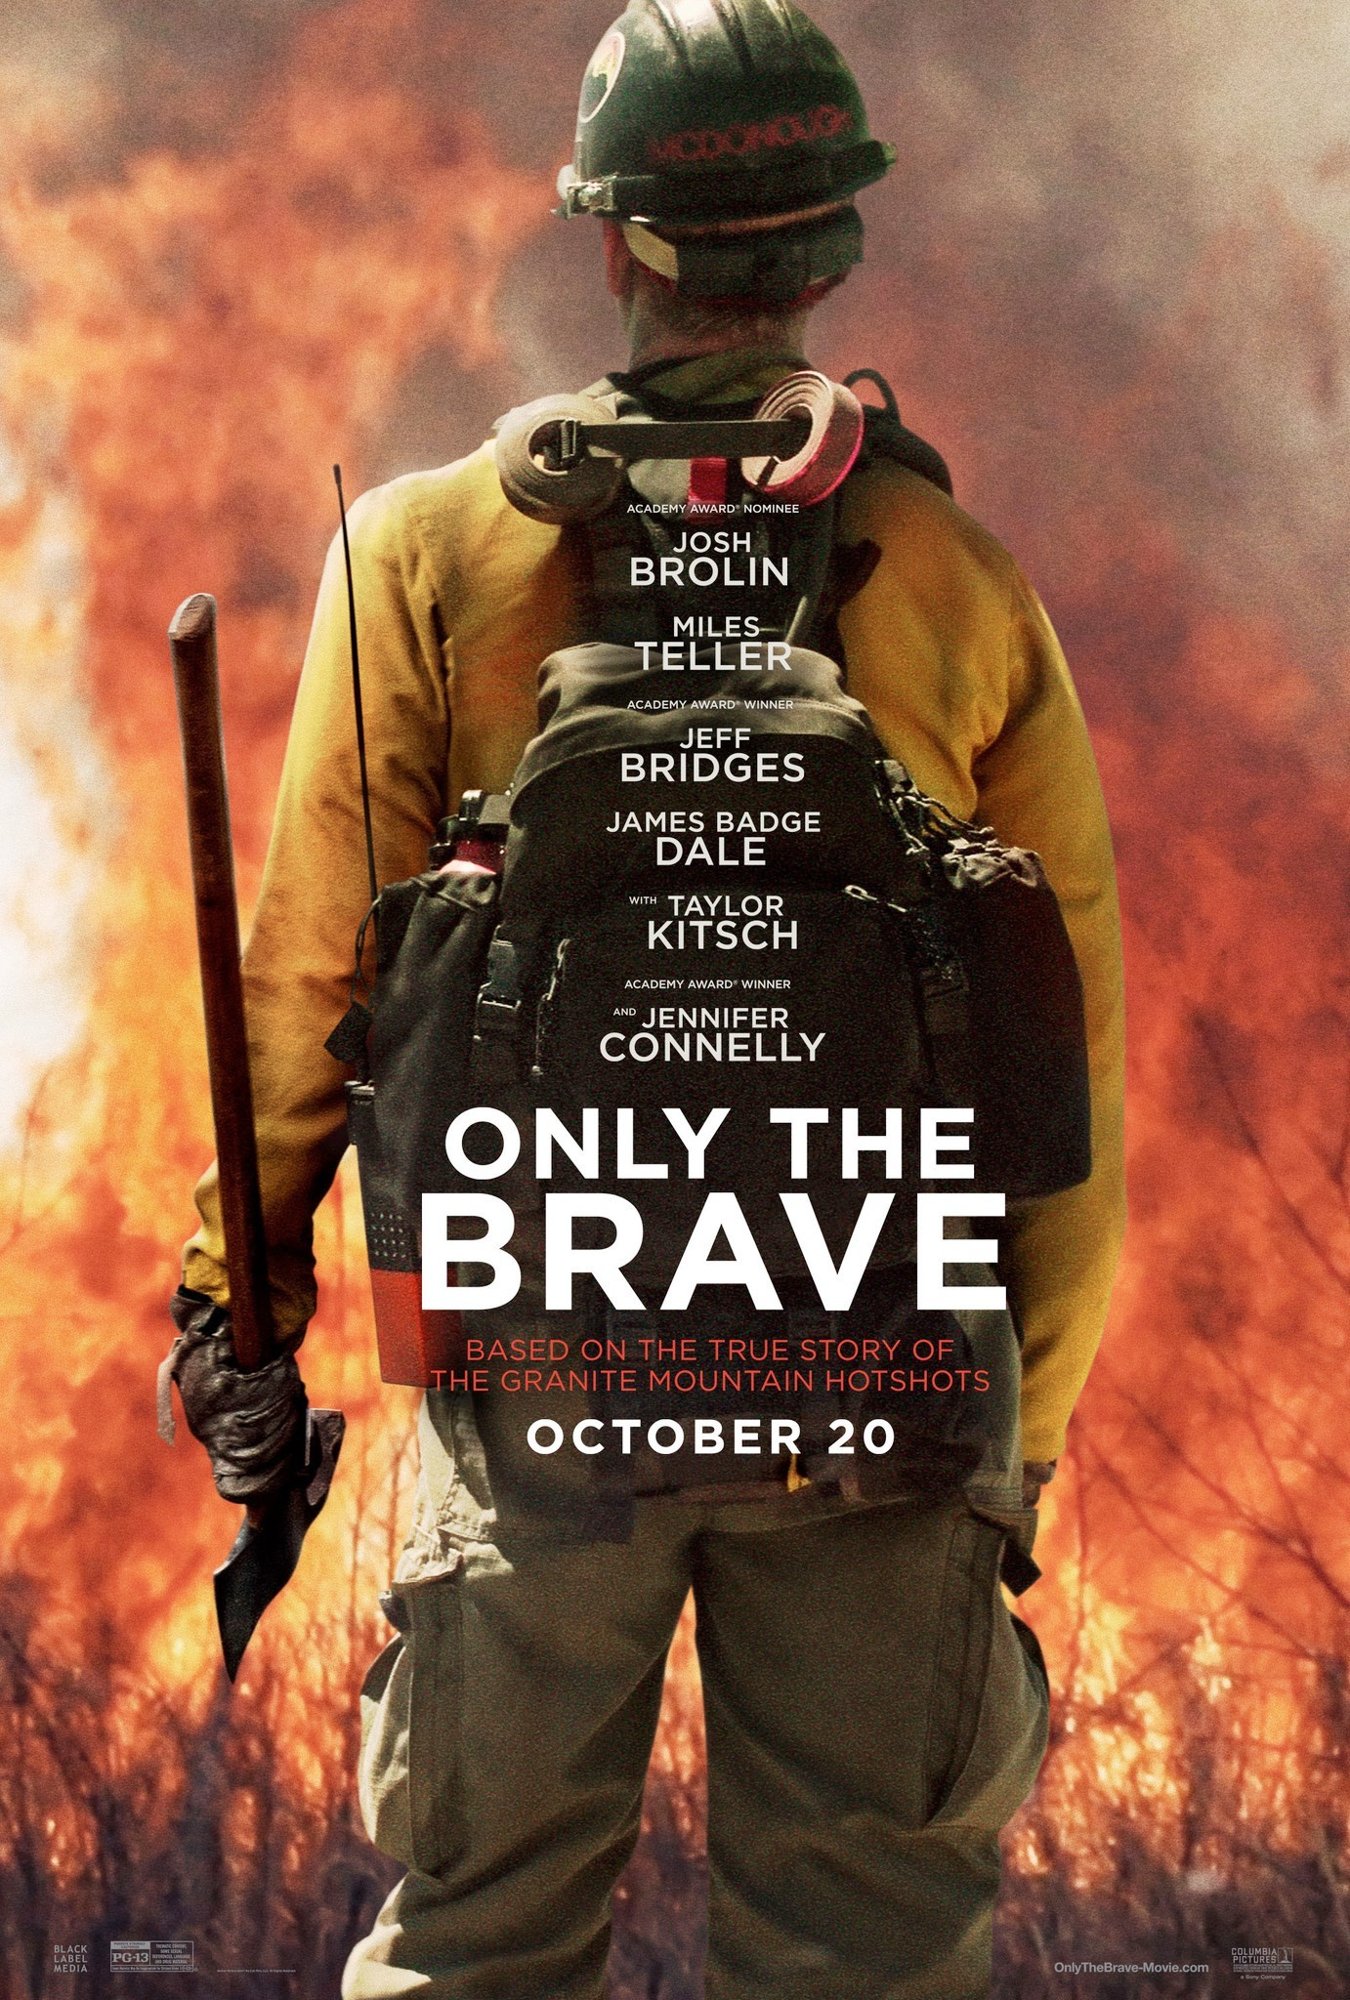 only the brave firefighter